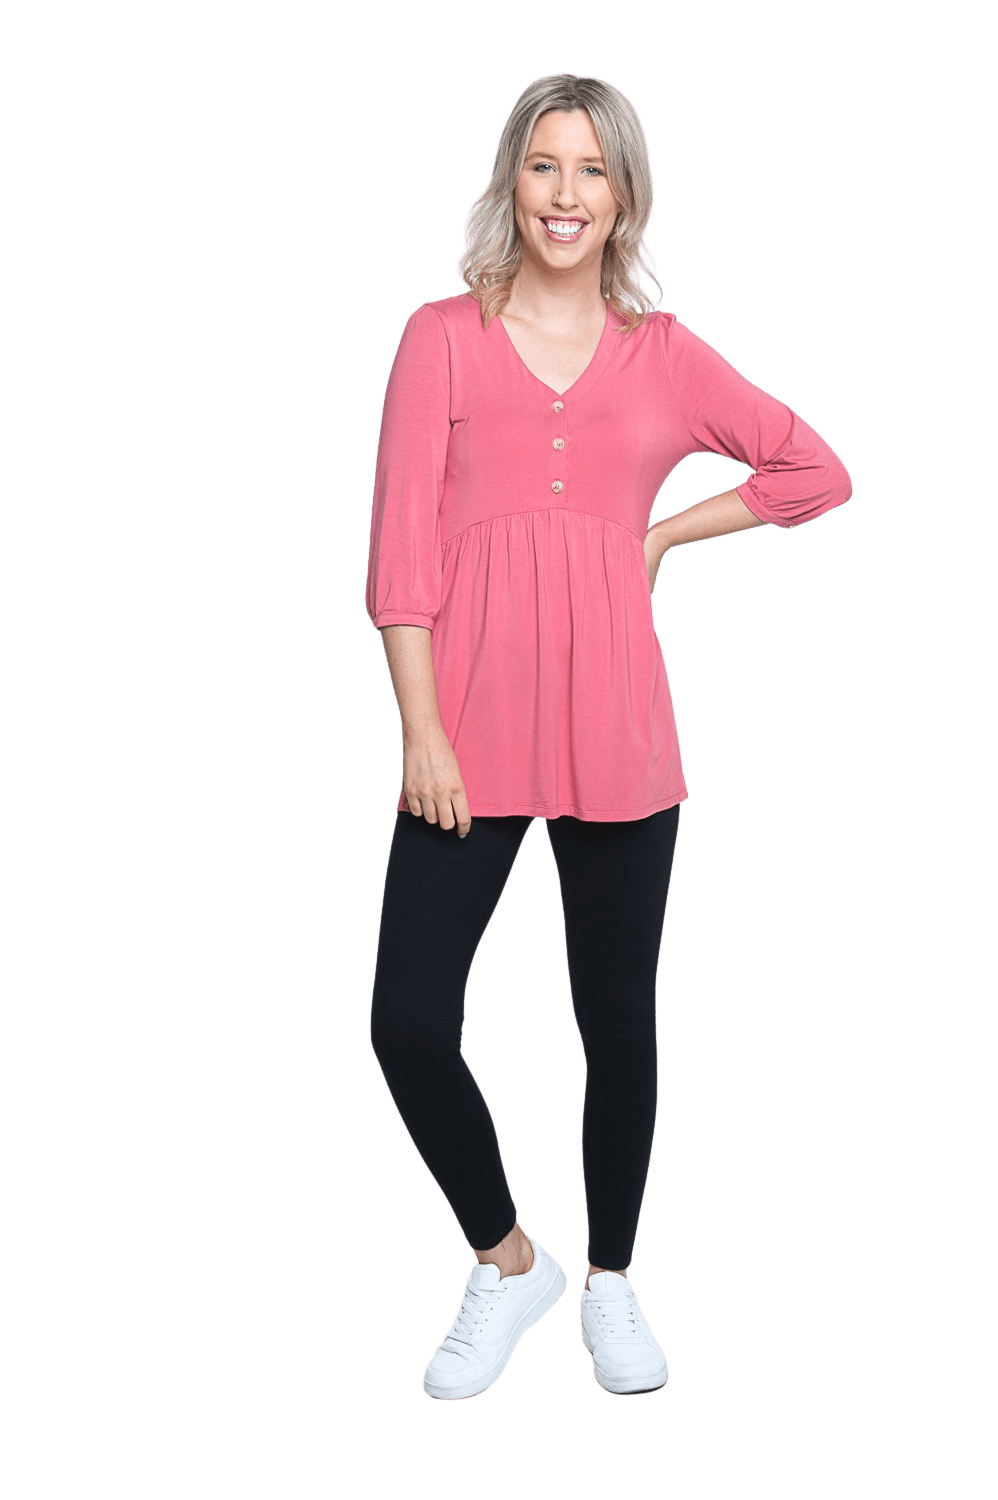 Petite model facing camera wearing pink, mid-length sleeved top. Features button up v-neckline and peplum tier under bust. Dylan available in sizes 6-26